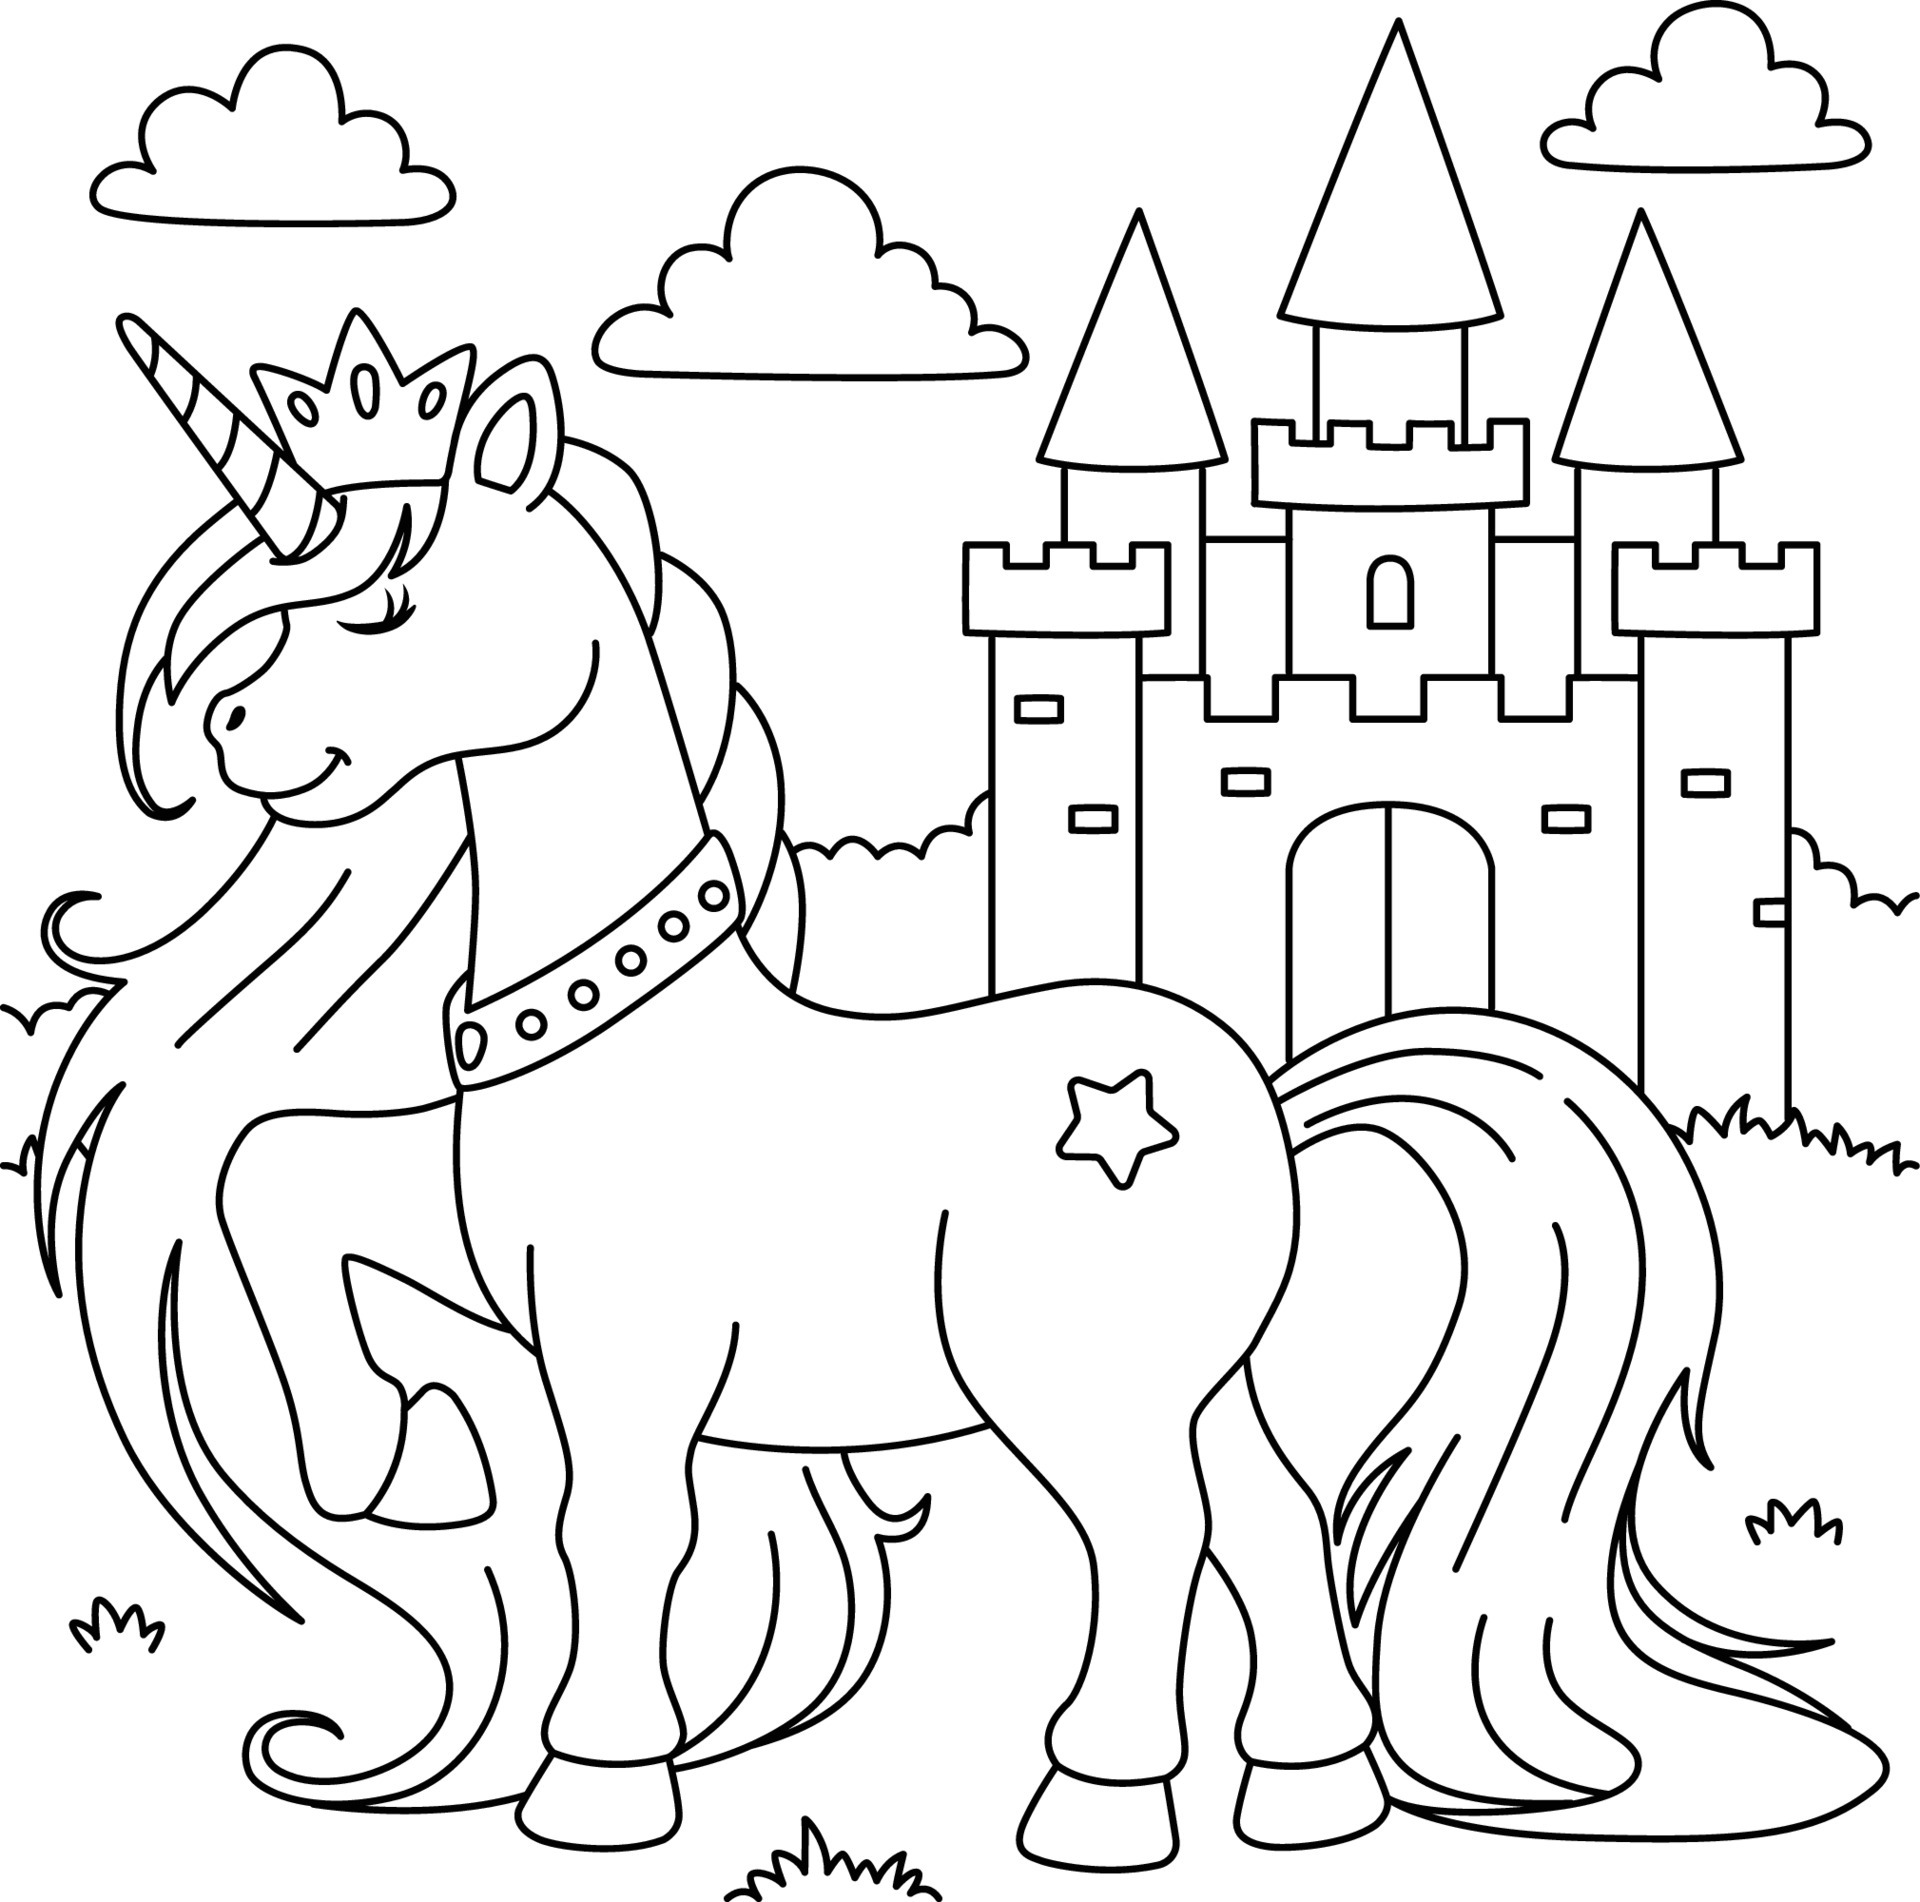 Unicorn Princess Coloring Page for Kids 20 Vector Art at Vecteezy